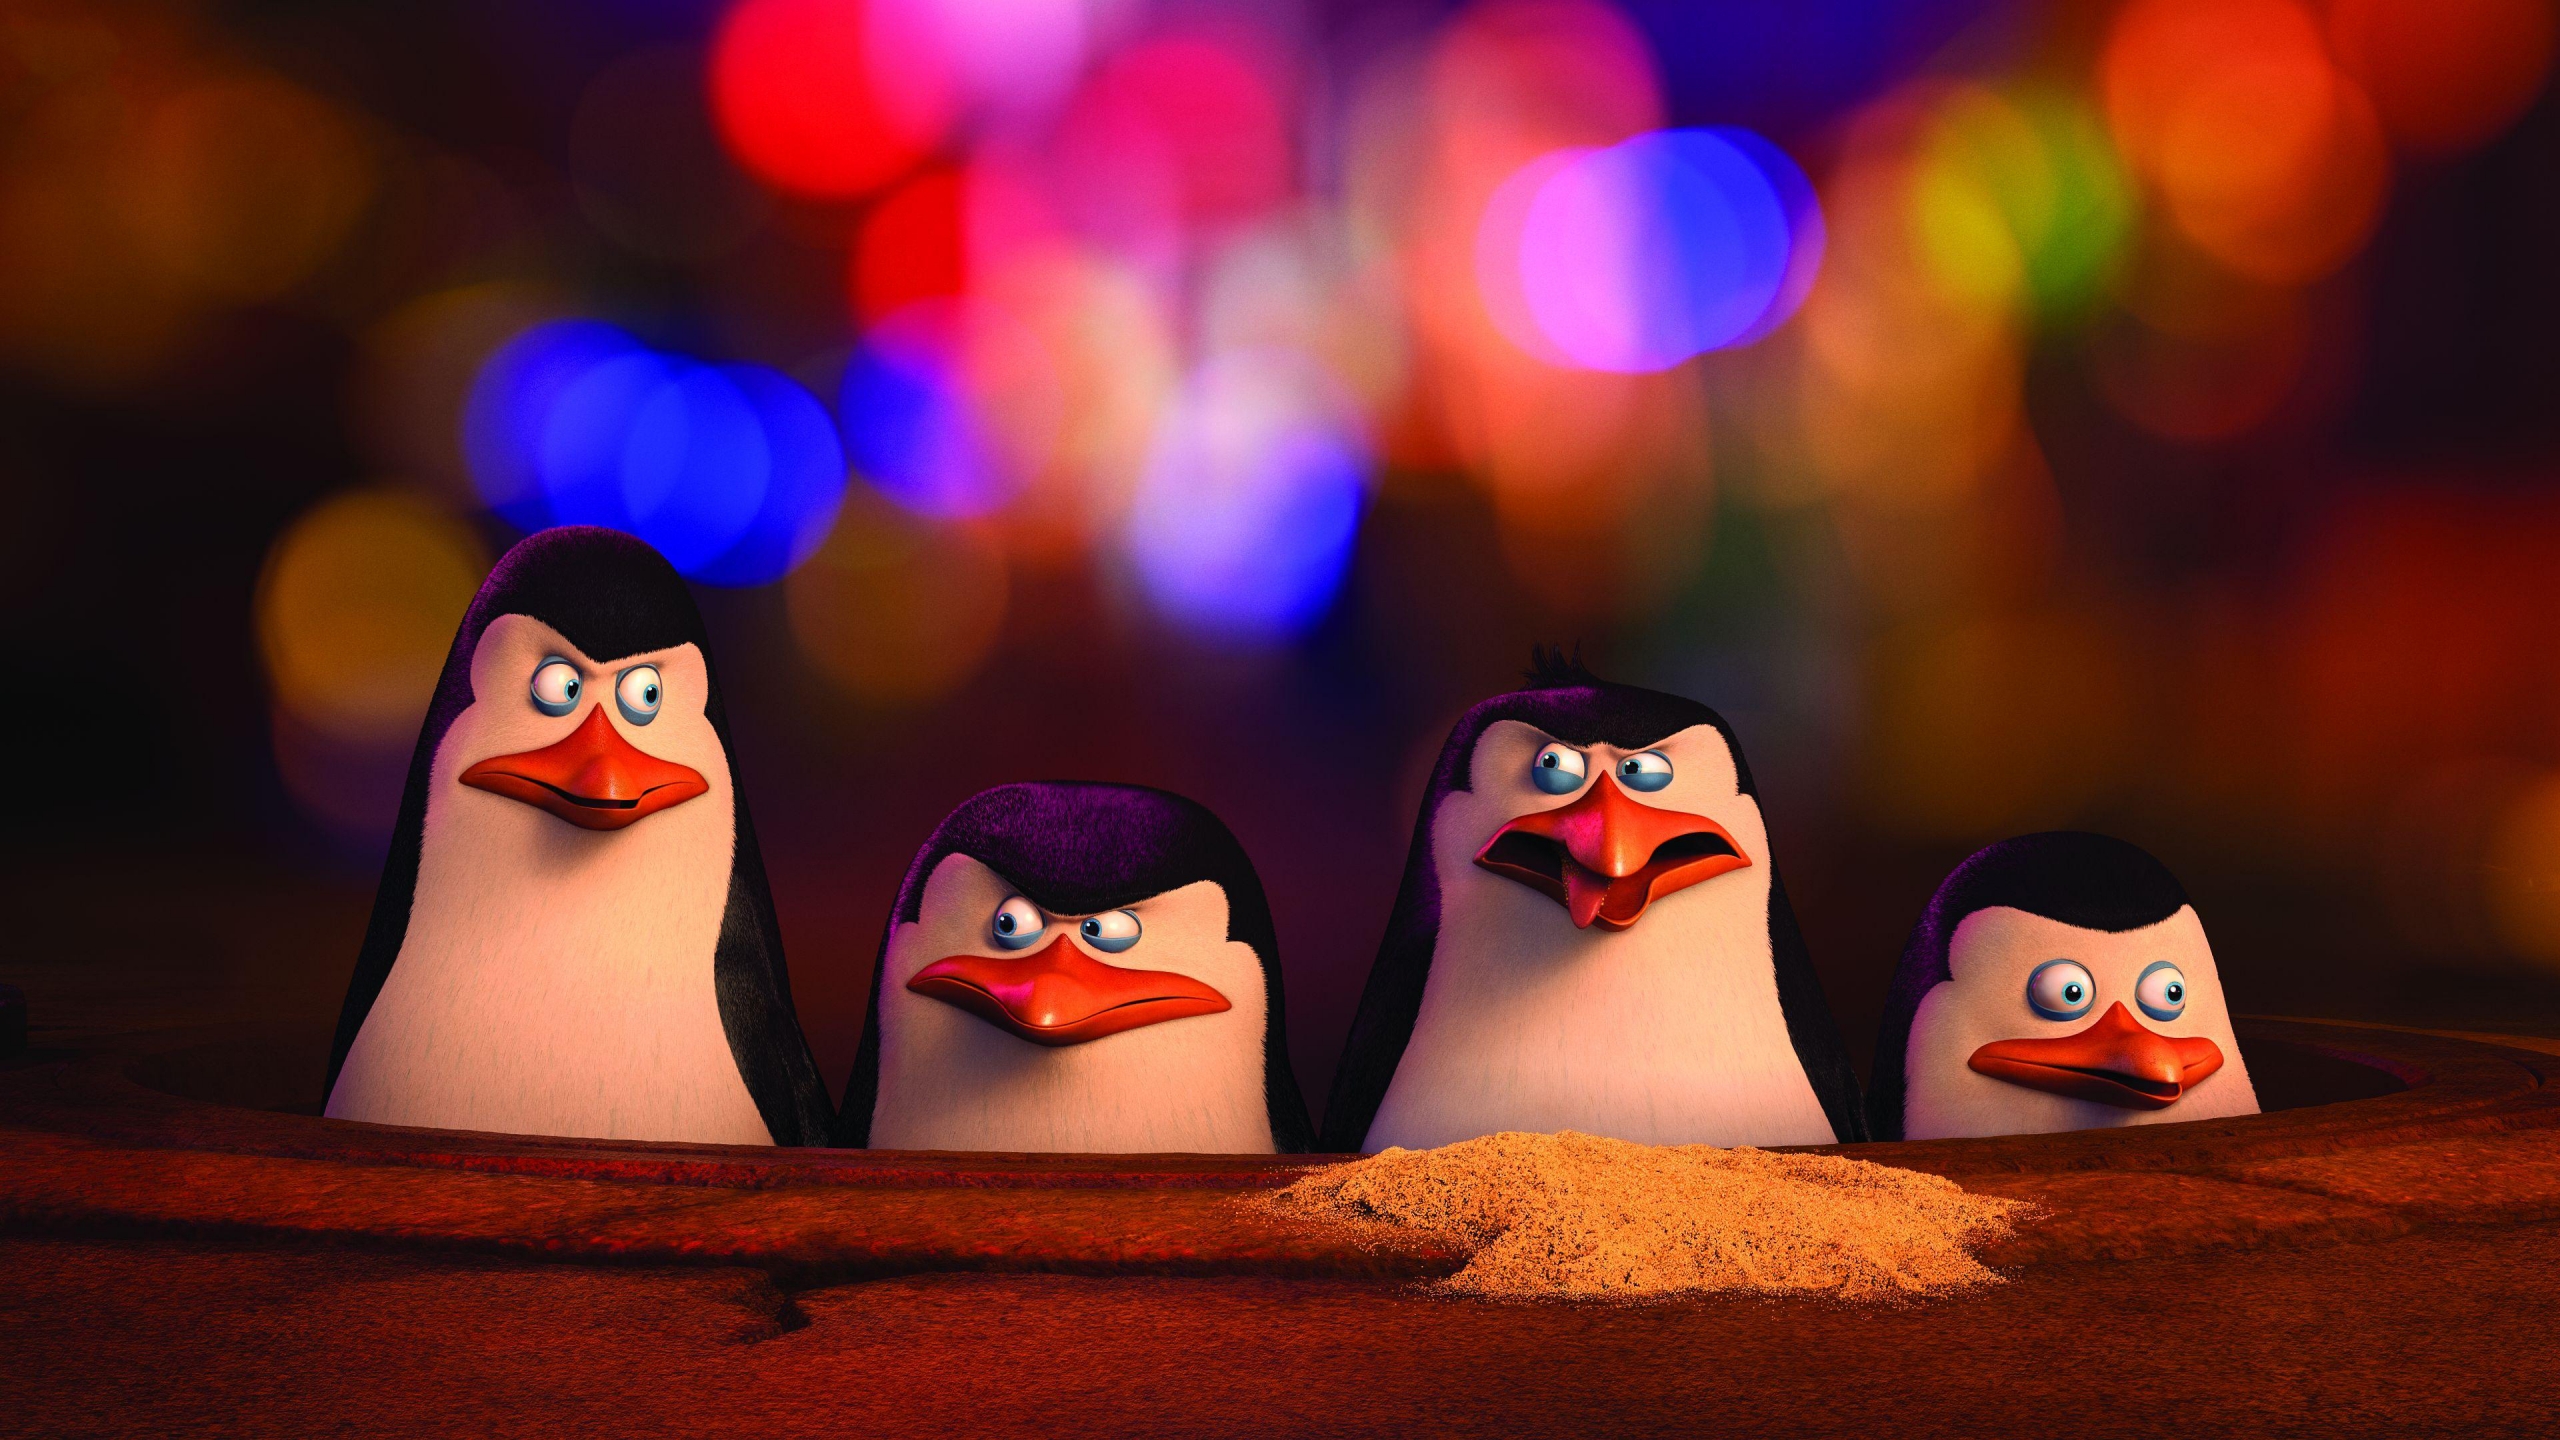 The Penguins of Madagascar Movie for 2560x1440 HDTV resolution